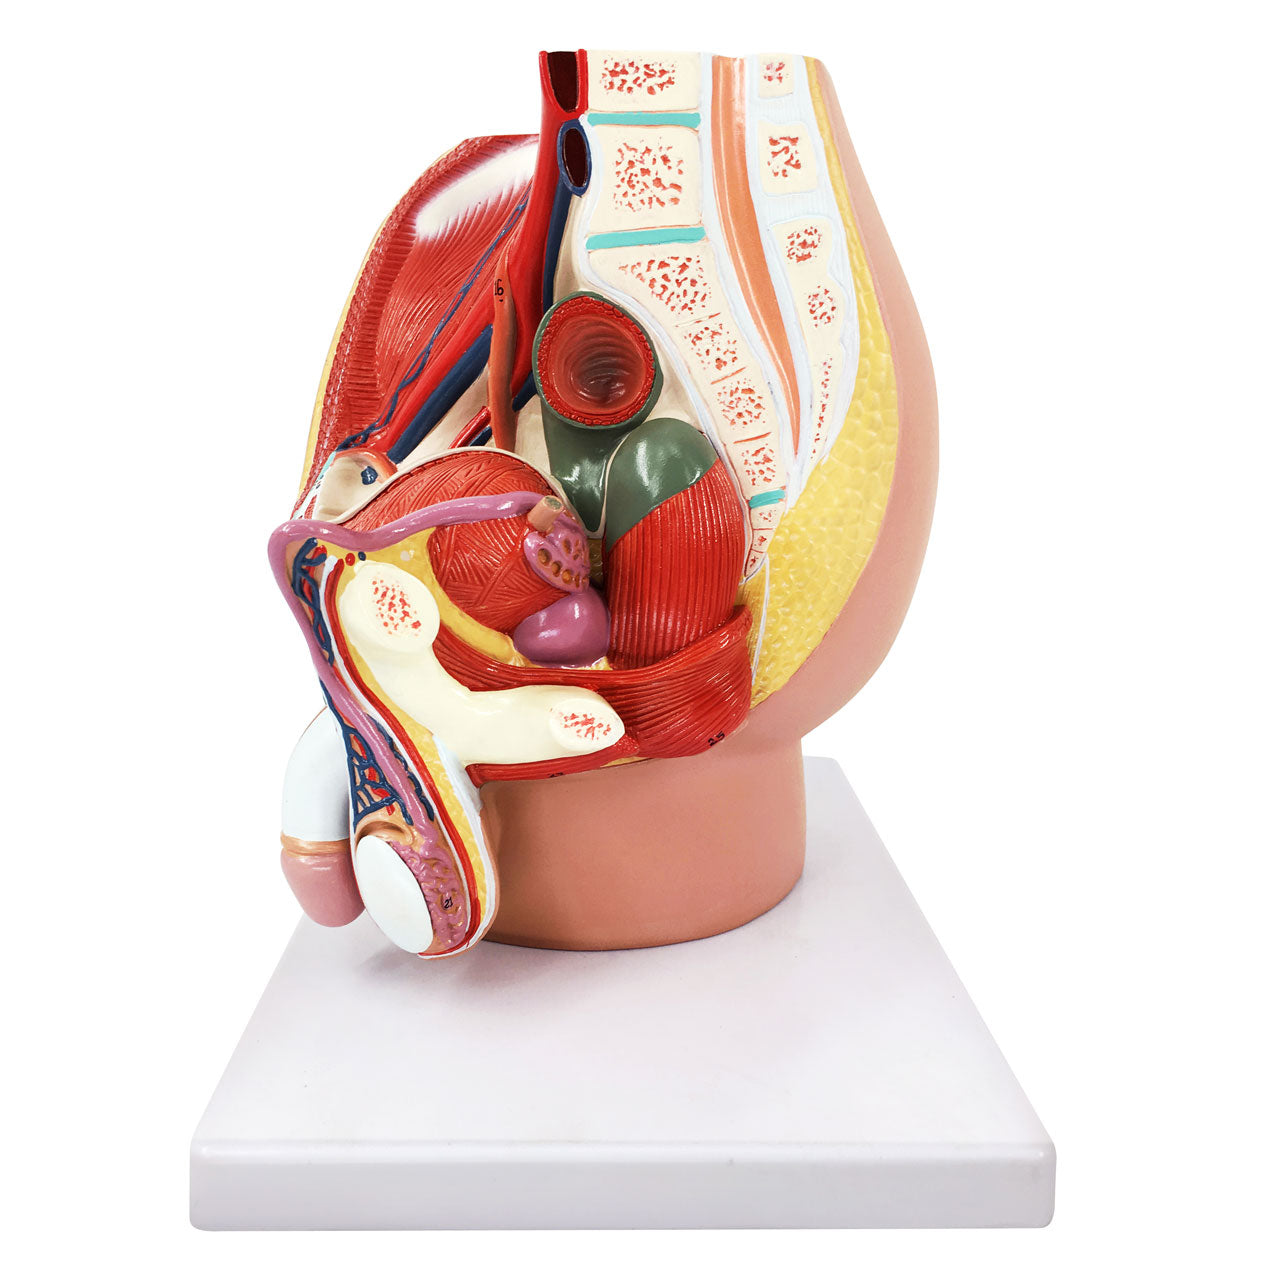 Evotech Scientific 4-Part Male Pelvis Model Life-Size Male Reproductive System and Anatomy Model